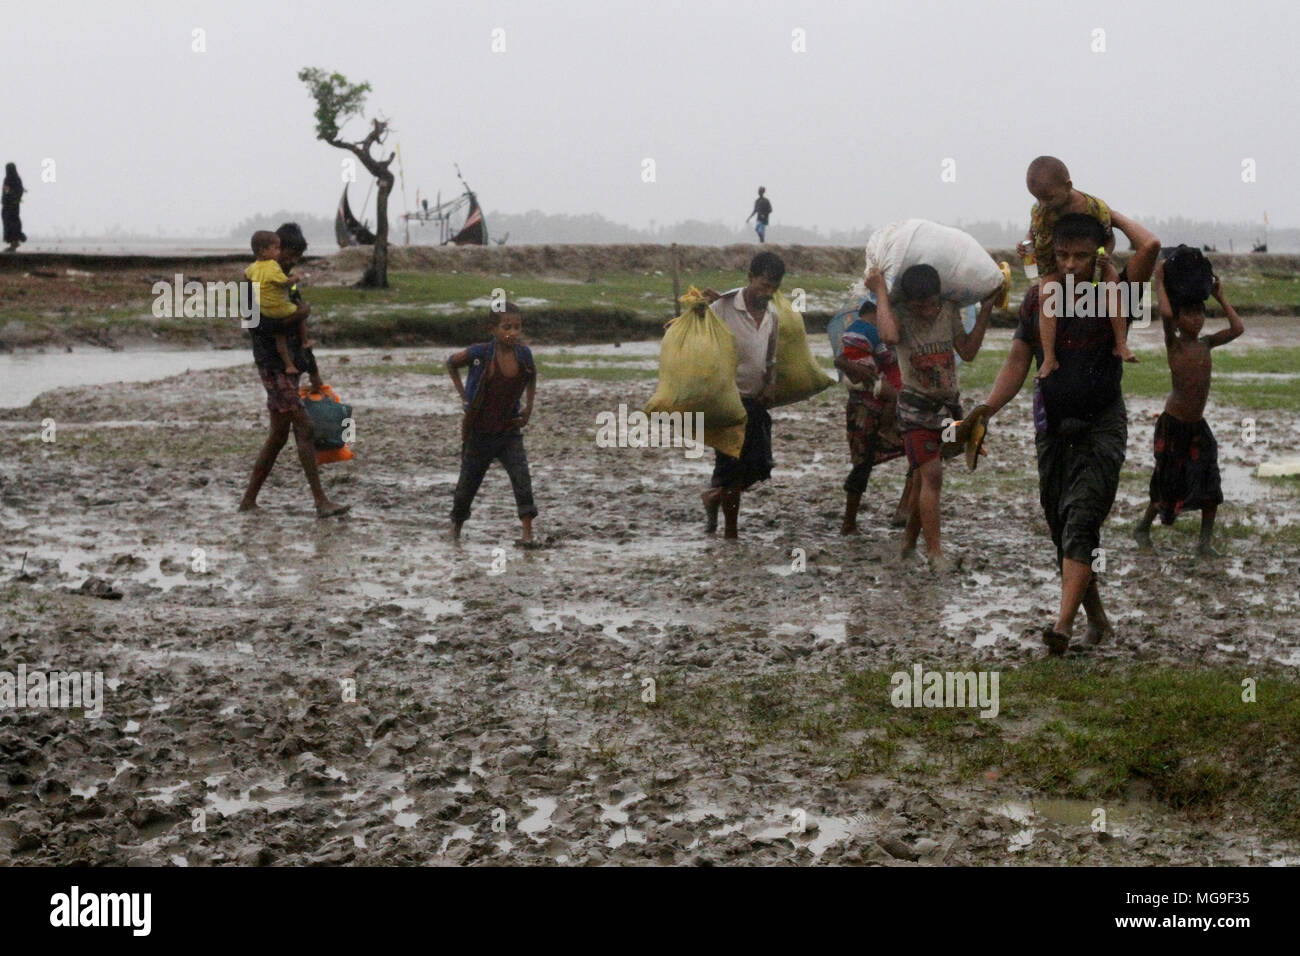 Bangladesh: Rohingya refugees fleeing military operation in Myanmar’s Rakhine state, entered Bangladesh territory to take shelter in Cox’s Bazar, Bangladesh on September 28, 2017. Over half a million Rohingya refugees from Myanmar’s Rakhine state, have crosses into Bangladesh since August 25, 2017 according to UN. The Myanmar military's latest campaign against the Rohingyas began after the attack on multiple police posts in Rakhine state. © Rehman Asad/Alamy Stock Photo Stock Photo